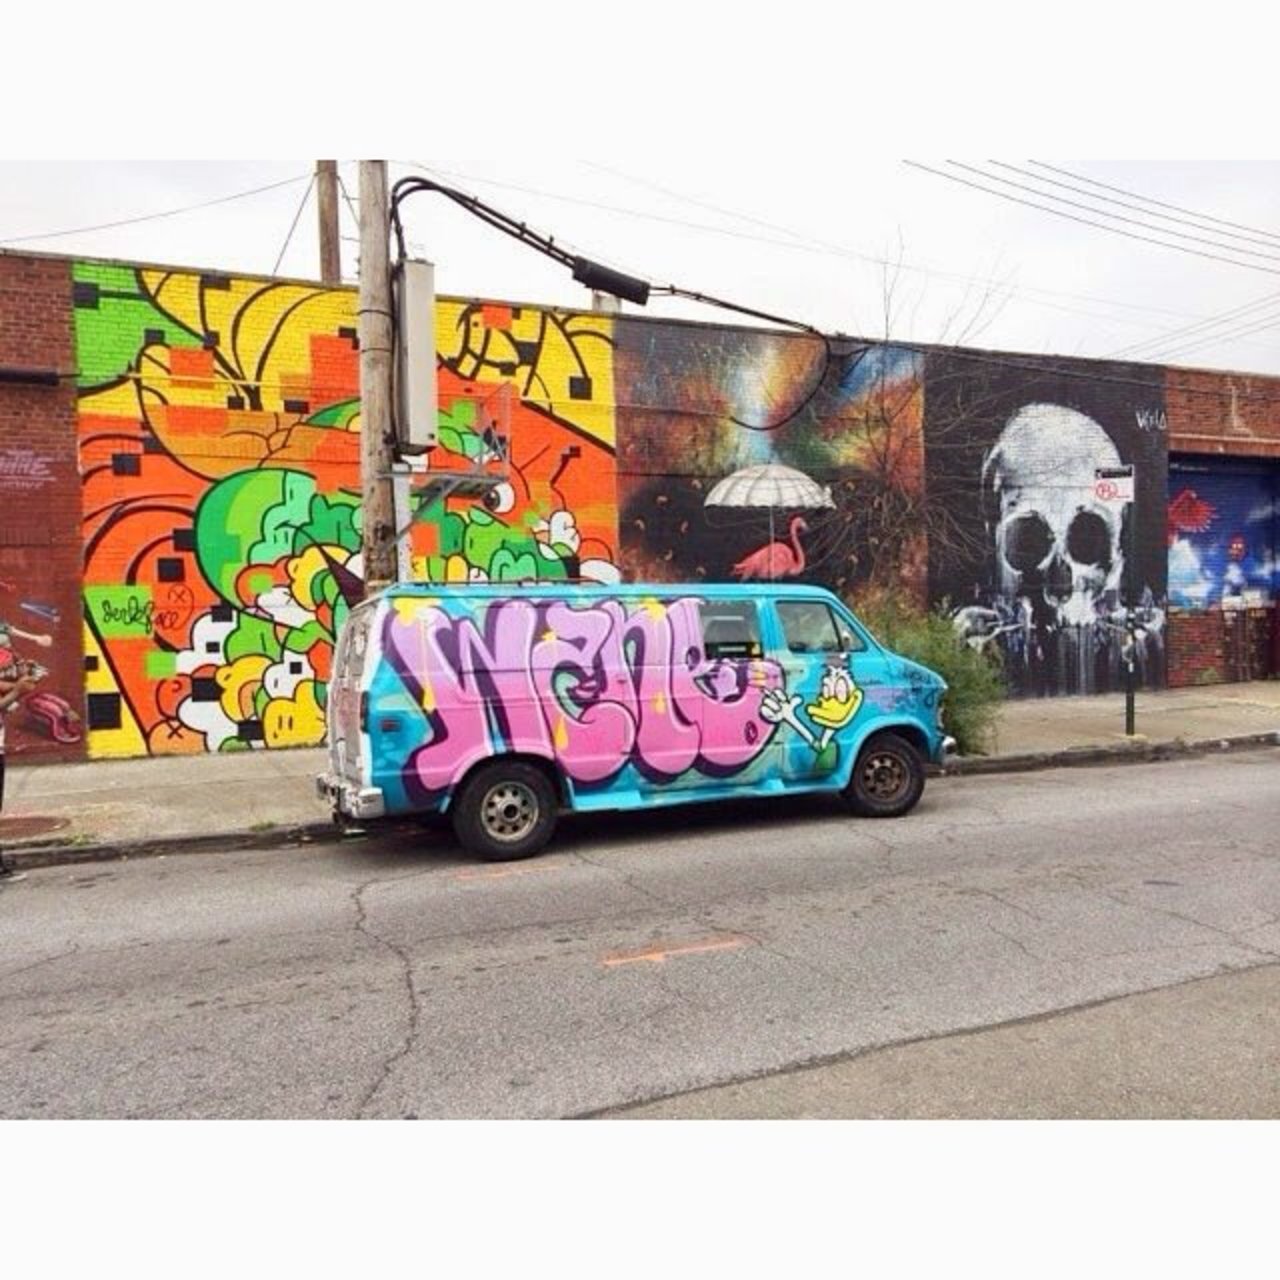 I saw this van in #brooklyn . Does anyone know of the #artist ? #streetart #graffiti https://t.co/TNVxOkSCDV